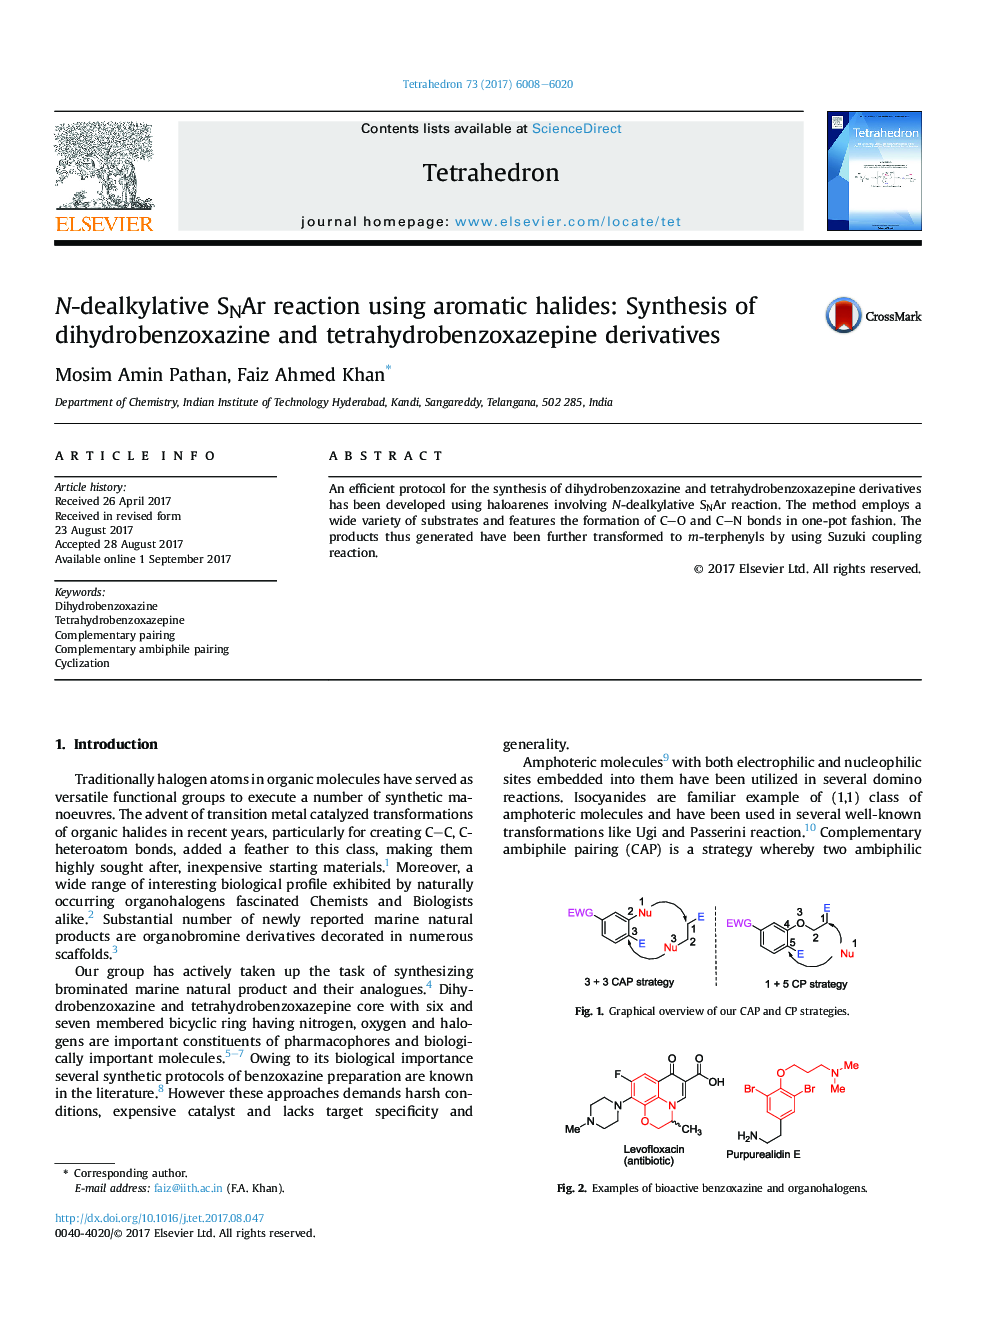 N-dealkylative SNAr reaction using aromatic halides: Synthesis of dihydrobenzoxazine and tetrahydrobenzoxazepine derivatives